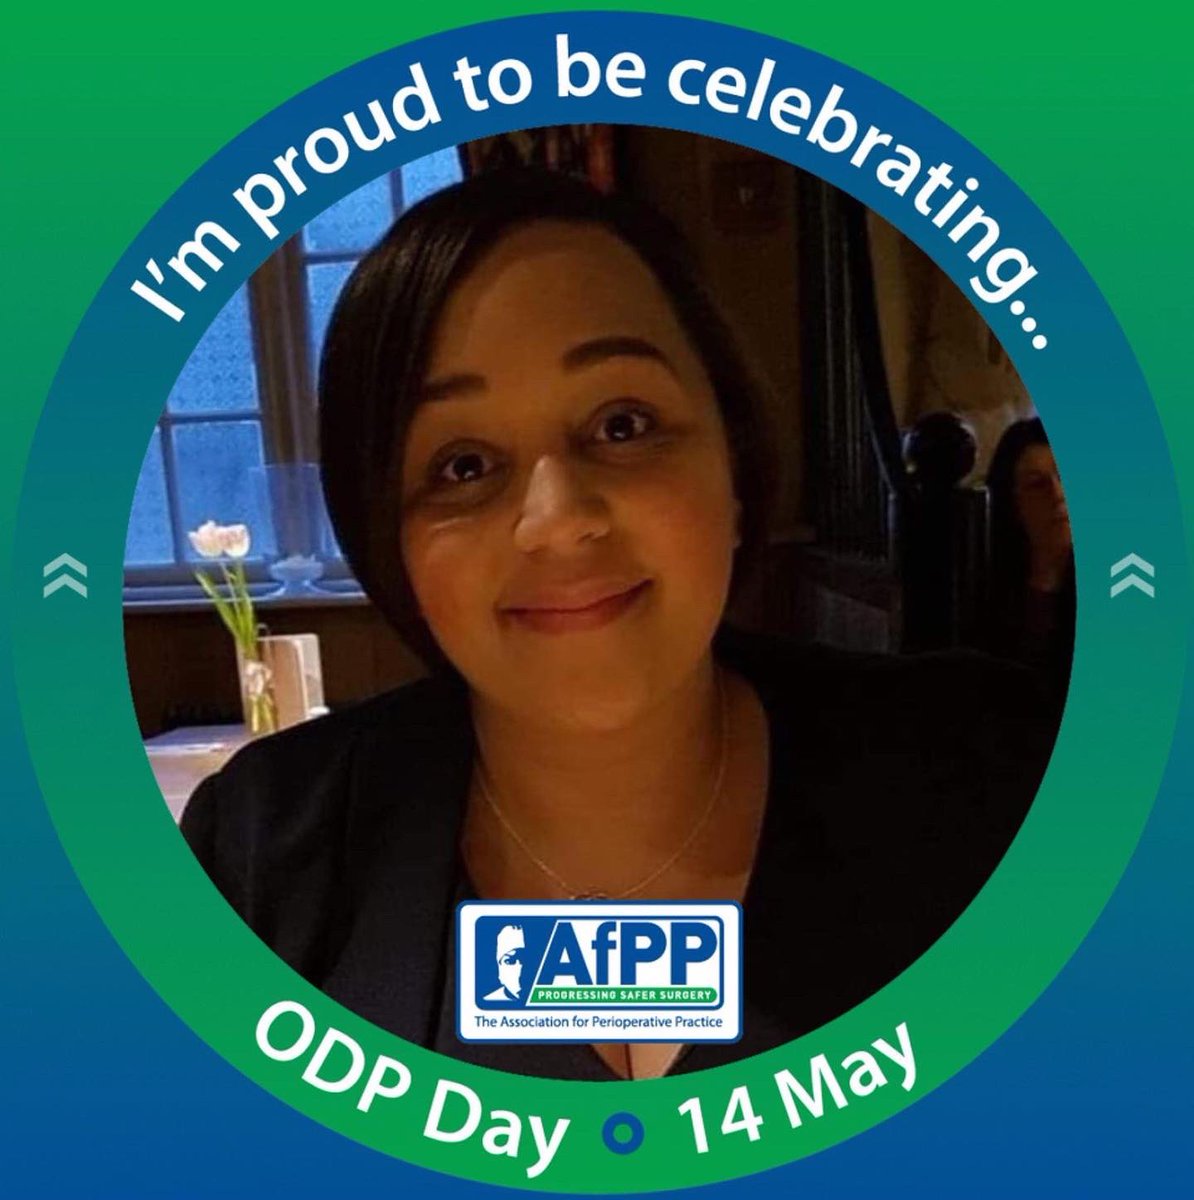 Happy National #ODPDay… I am always proud to@be part of our amazing profession. I thought I would start early & share my thoughts on this special day …#LoveYourODP #PerioperativeCare